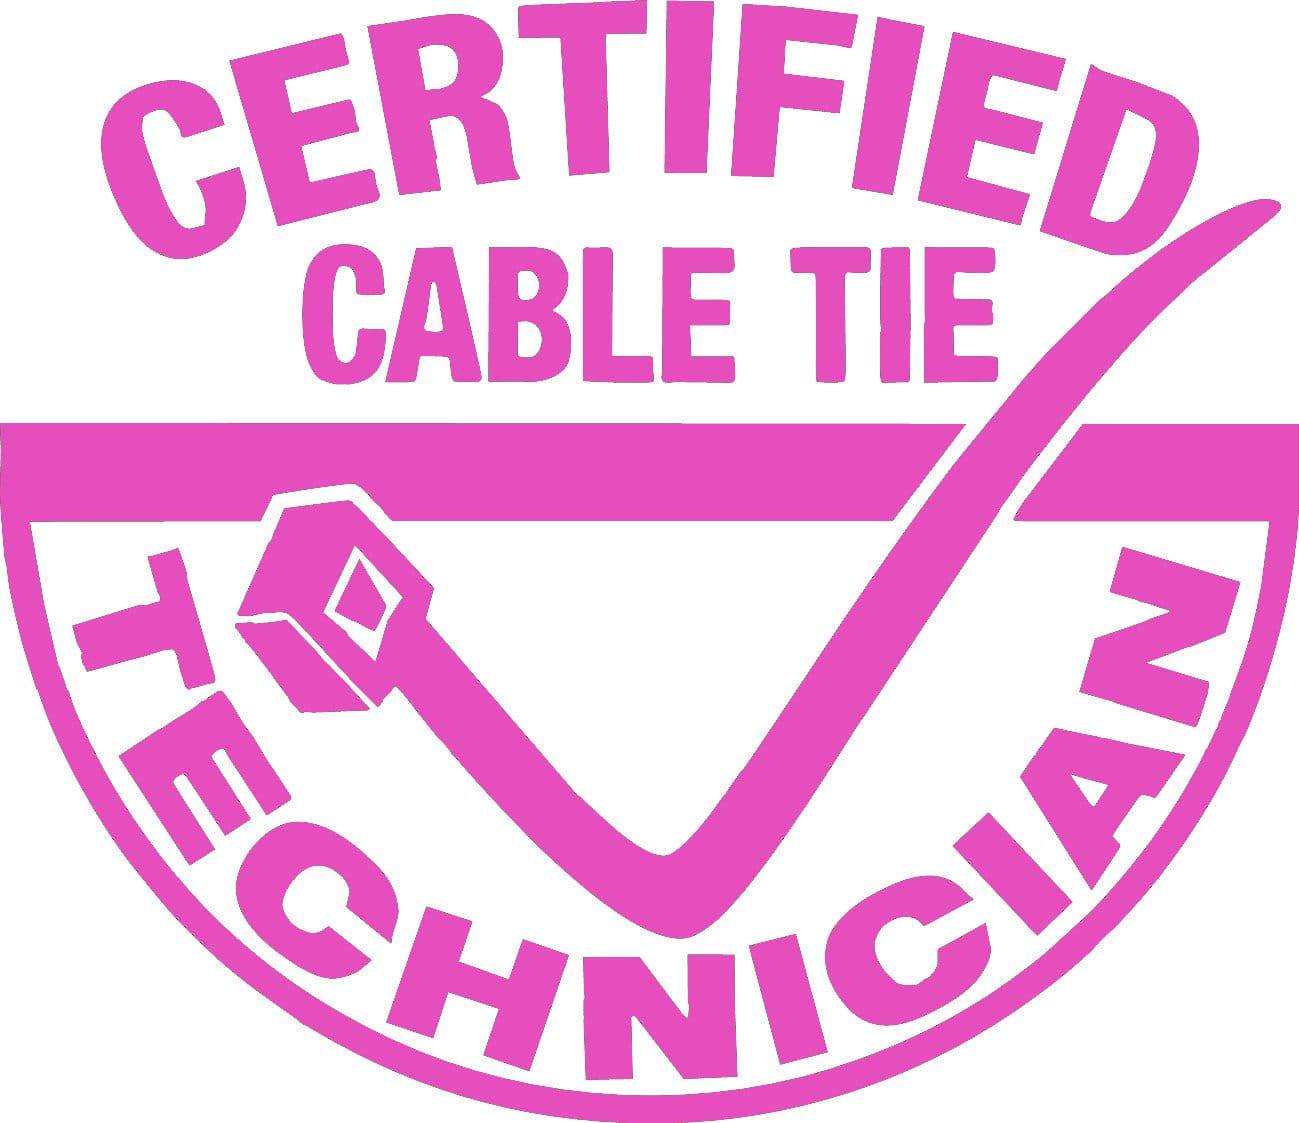 Certified Cable Tie Technicion Sticker - Funny Window / Windscreen Decal | QIKAZZ 4x4 & Camping